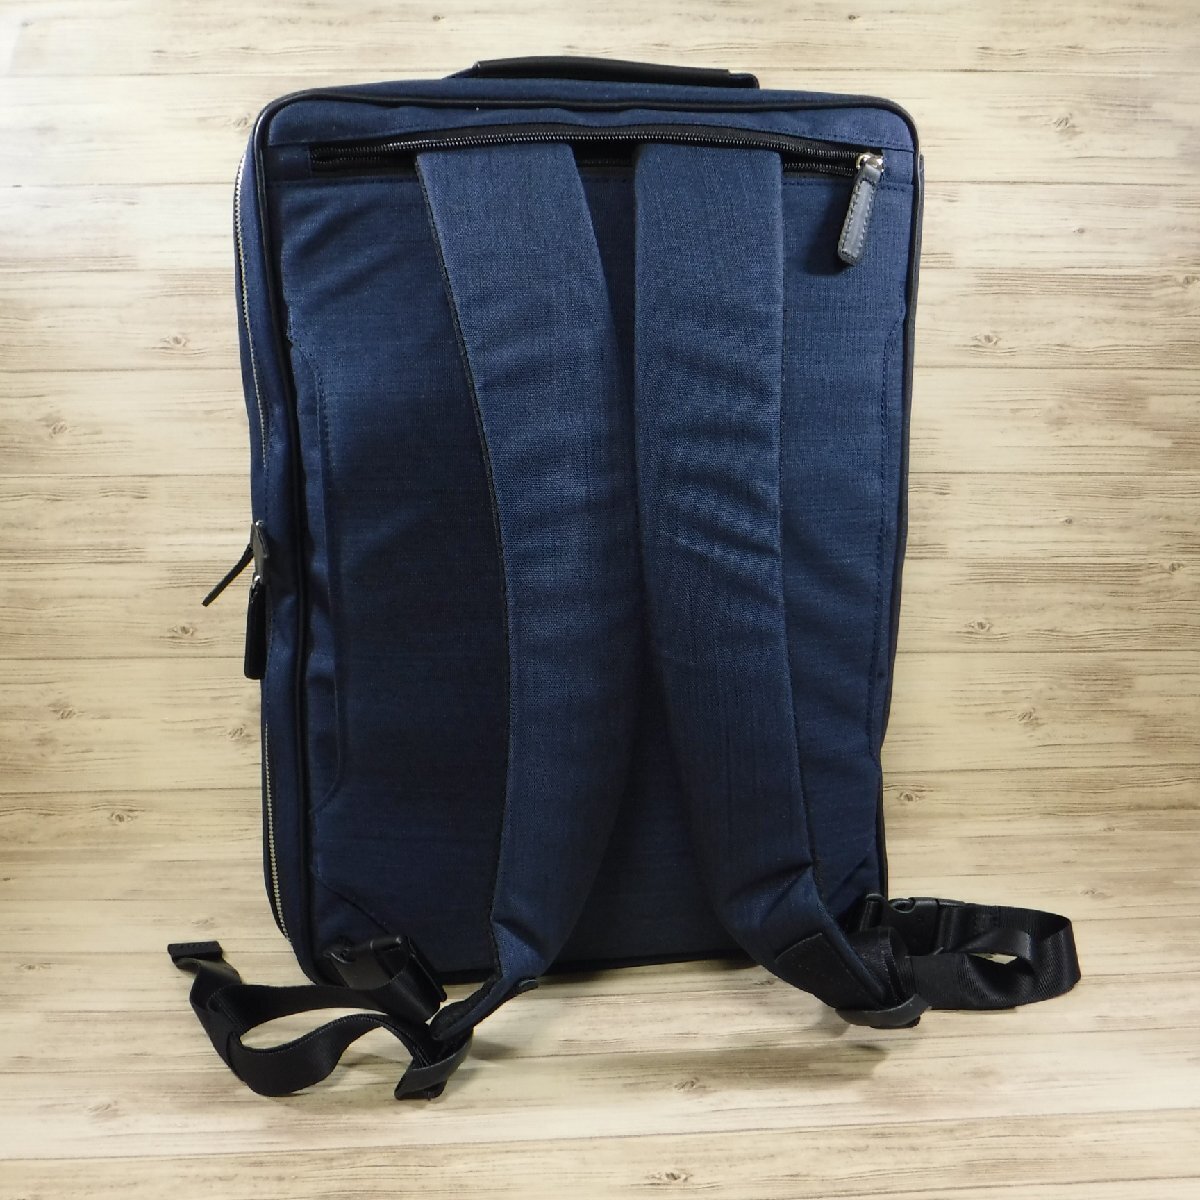 BB837izito regular price 41800 jpy 3WAY business bag rucksack . body type water-repellent 2in1 Dub Leroux mB4 new goods IS/IT business rucksack 962505 navy blue 